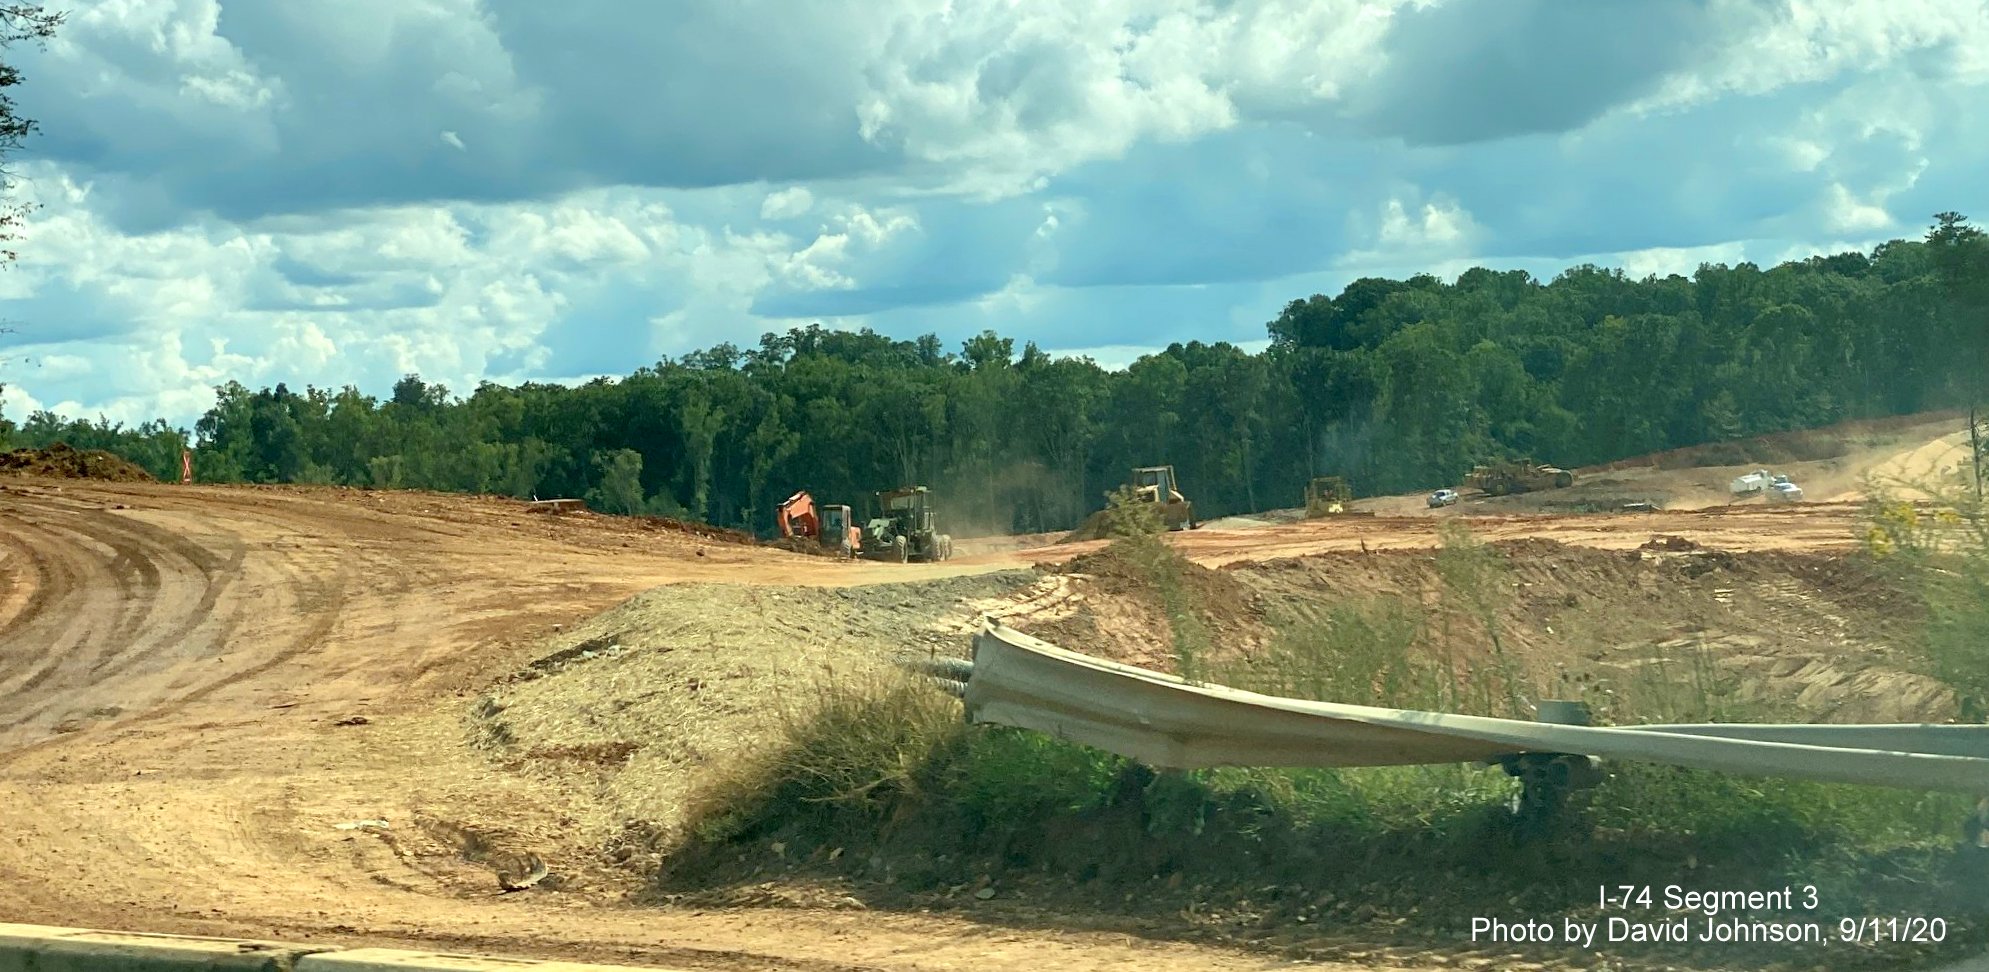 Image of site clearing and grading from US 52 South as part of future I-74 Winston Salem Northern Beltway interchange construction, by David Johnson September 2020